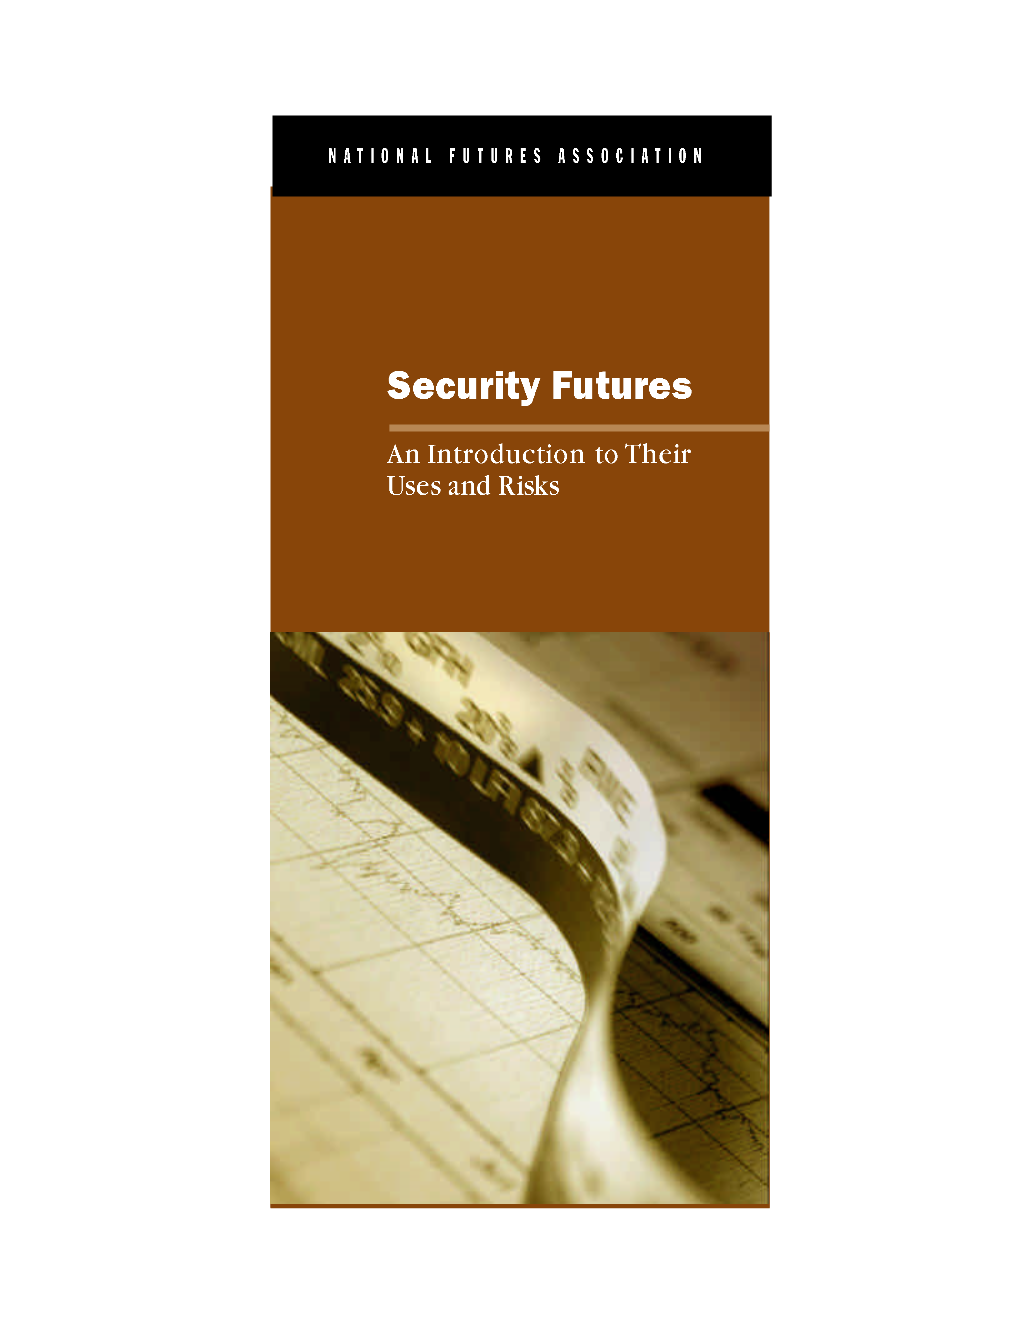 Security Futures: an Introduction to Their Uses and Risks